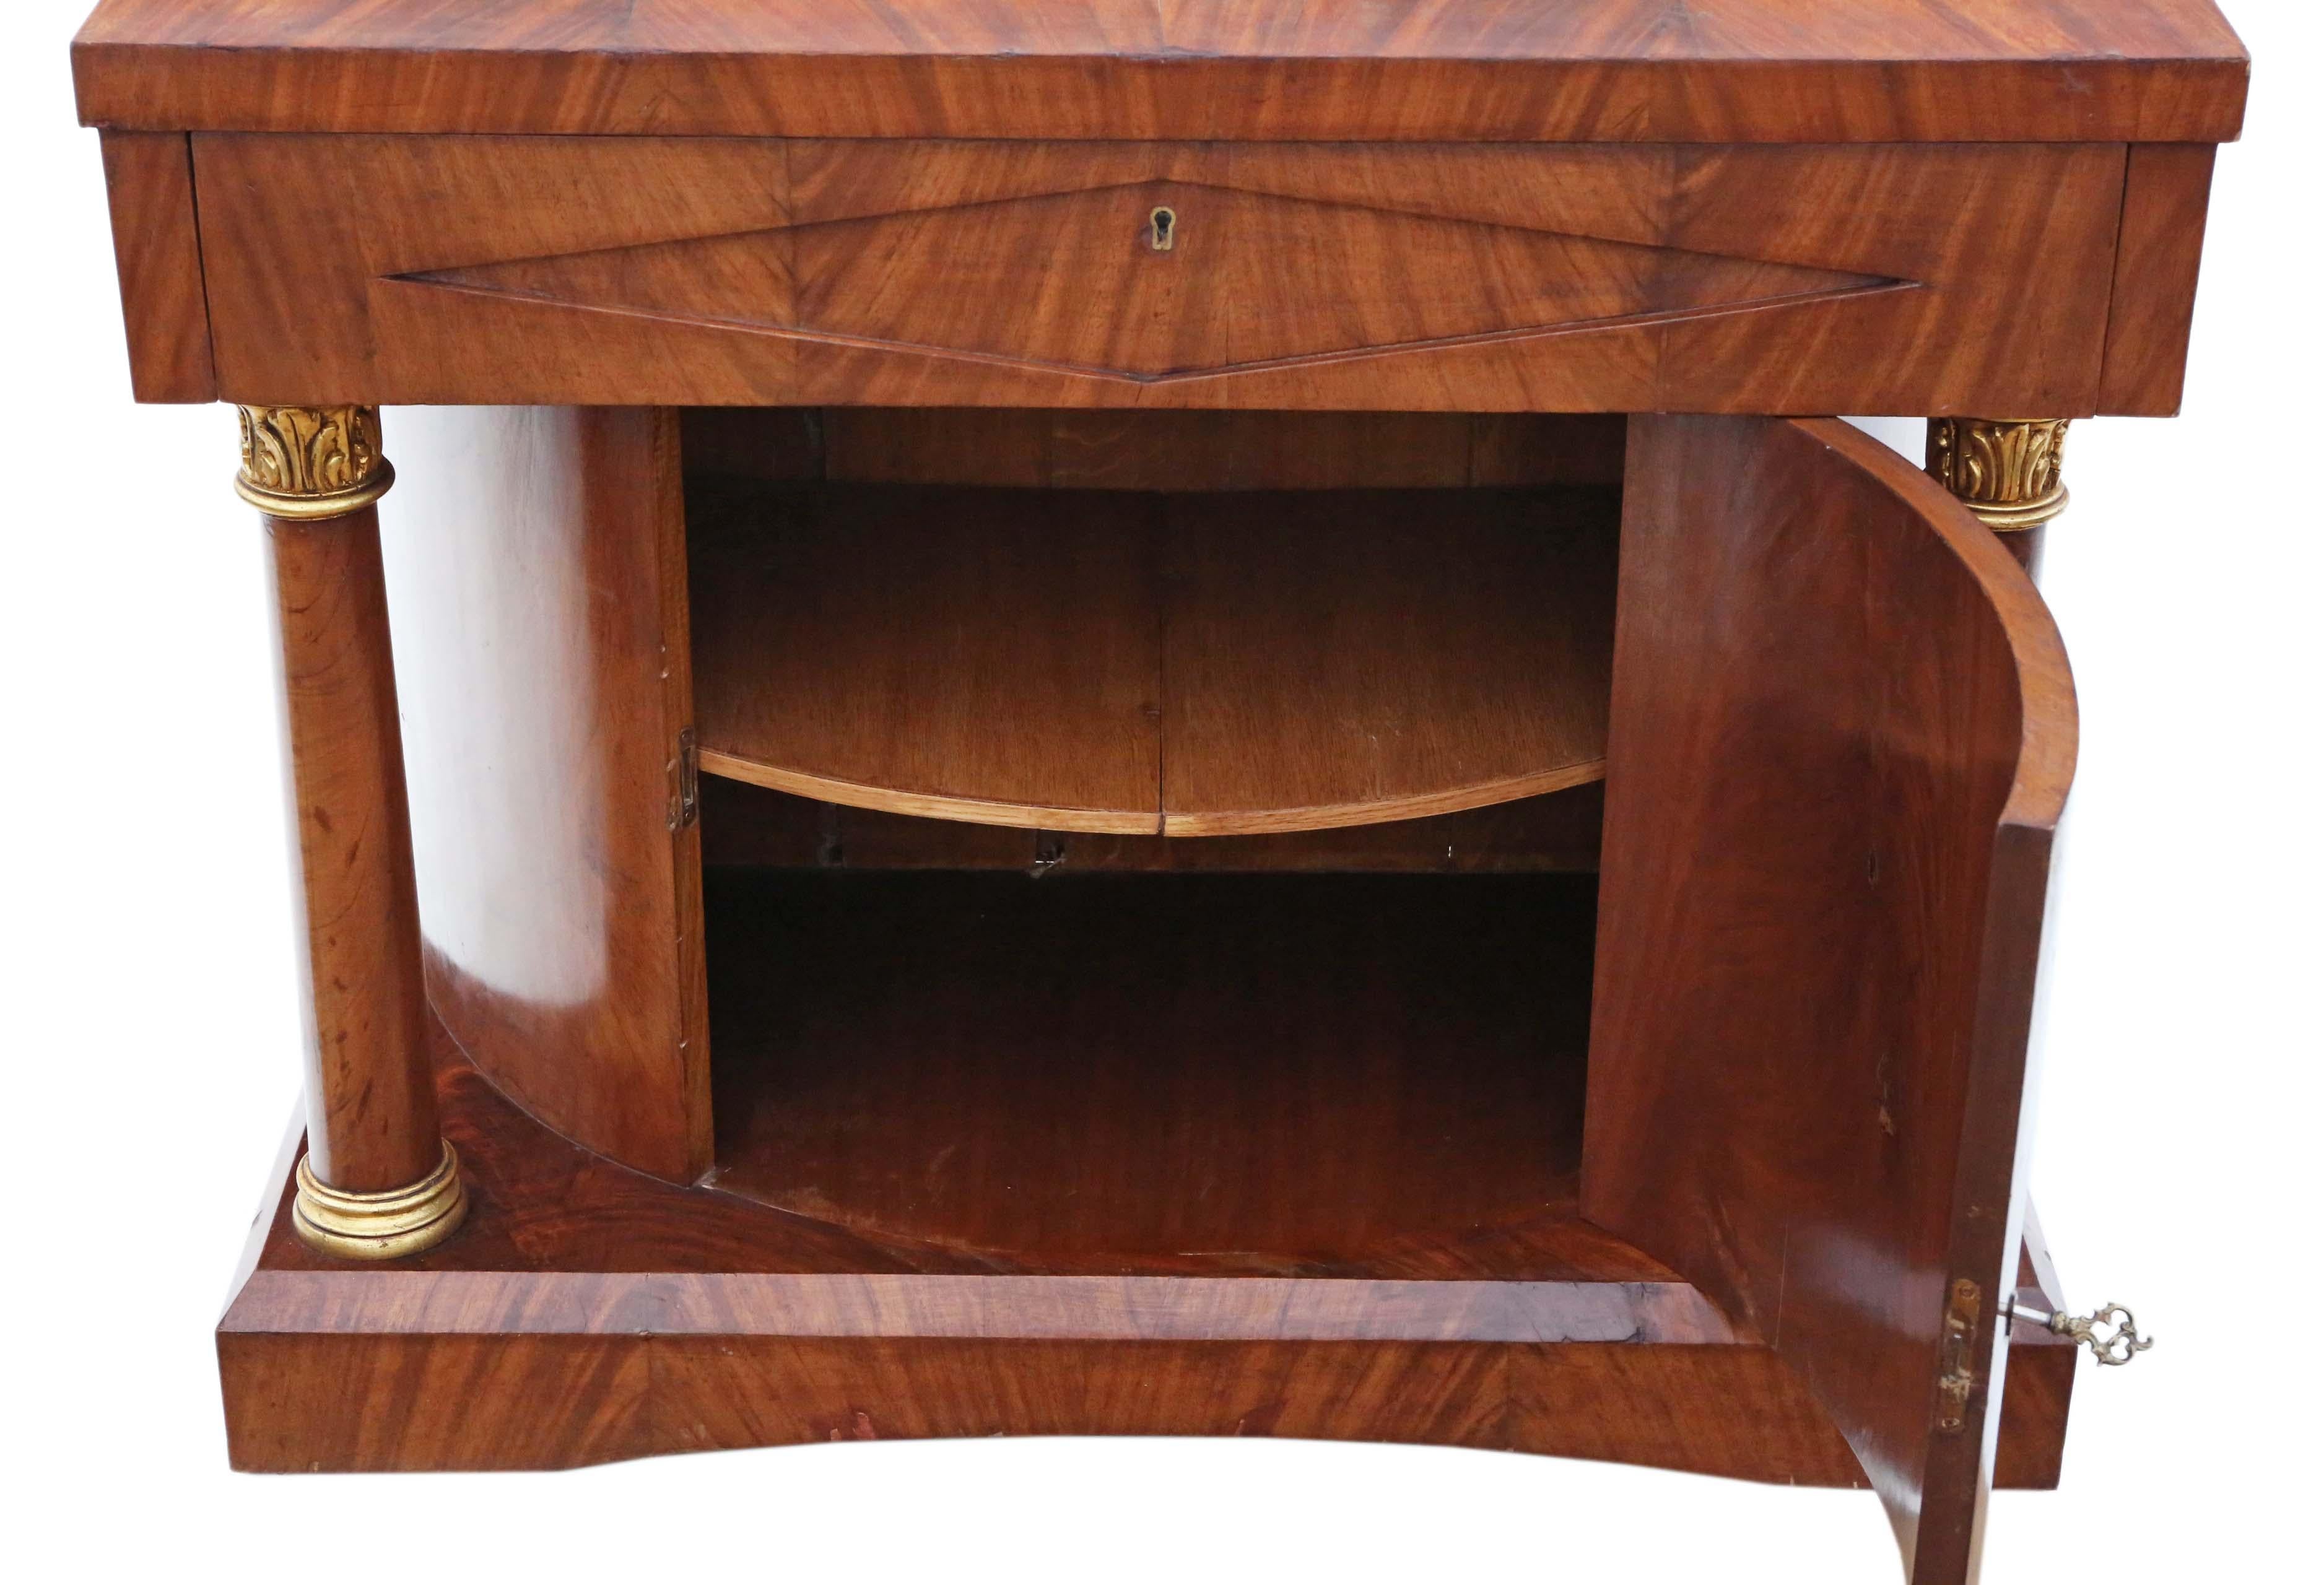 Antique Mahogany Regency Revival Console Cupboard Table In Good Condition For Sale In Wisbech, Cambridgeshire